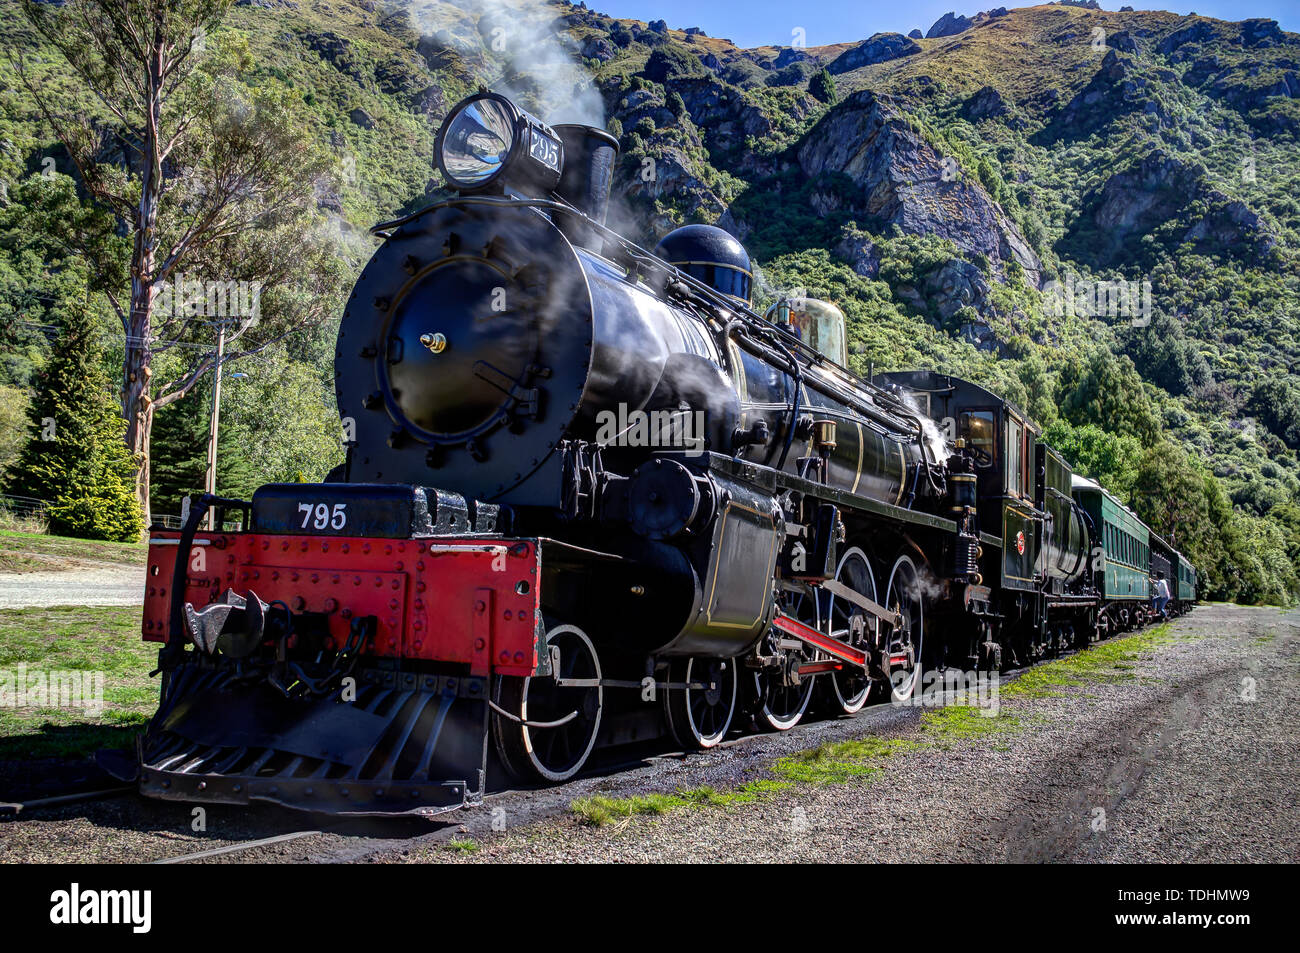 The Vintage steam engine The Kingston Flyer with head of steam at Kingston, New Zealand on 13 March 2012 Stock Photo